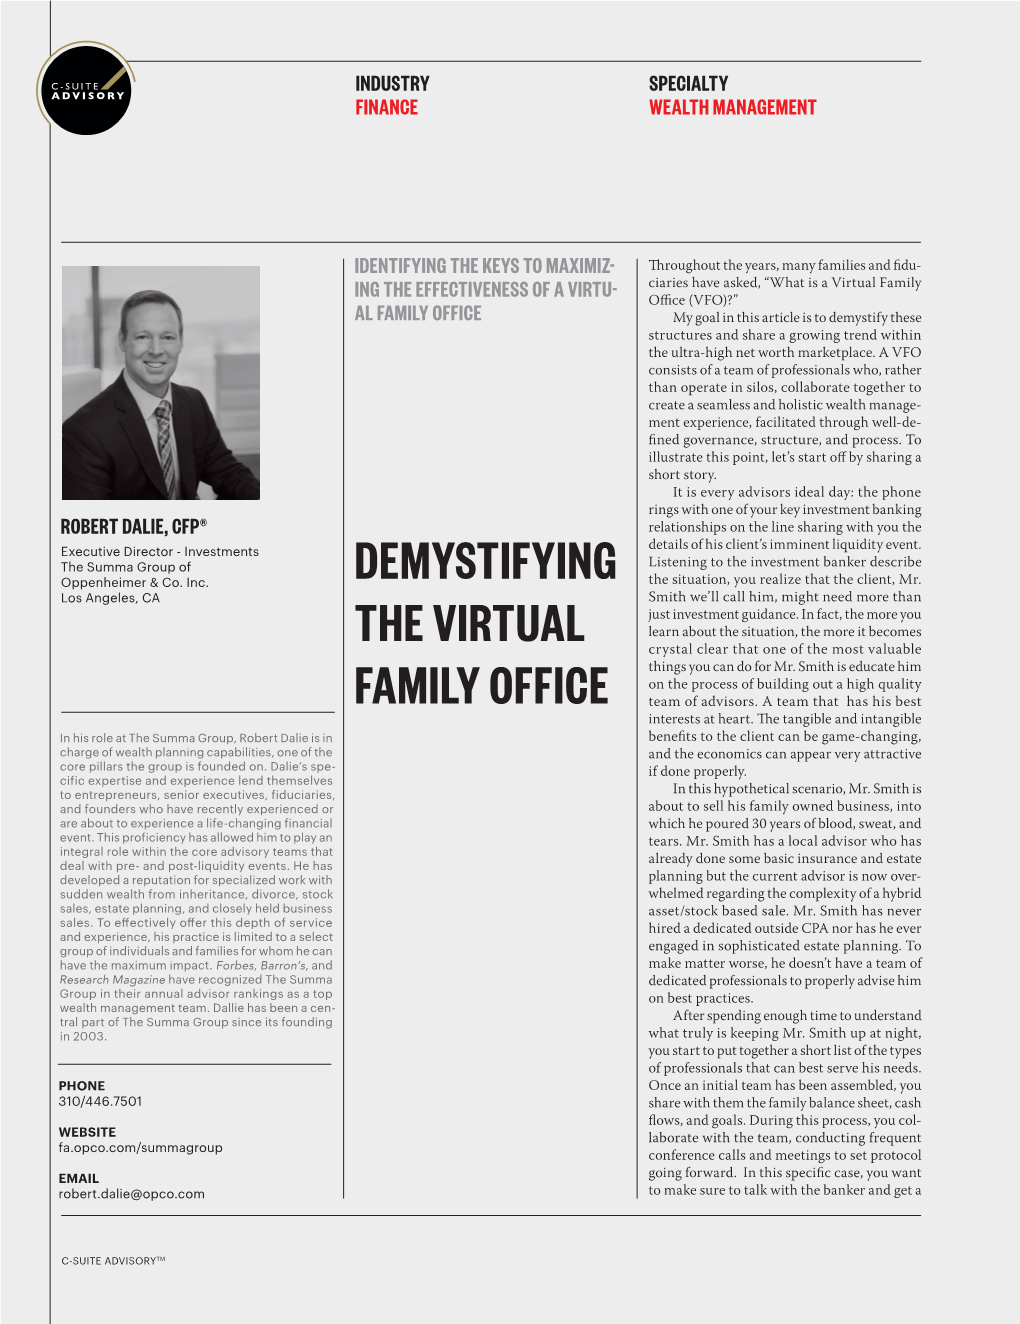 Demystifying the Virtual Family Office